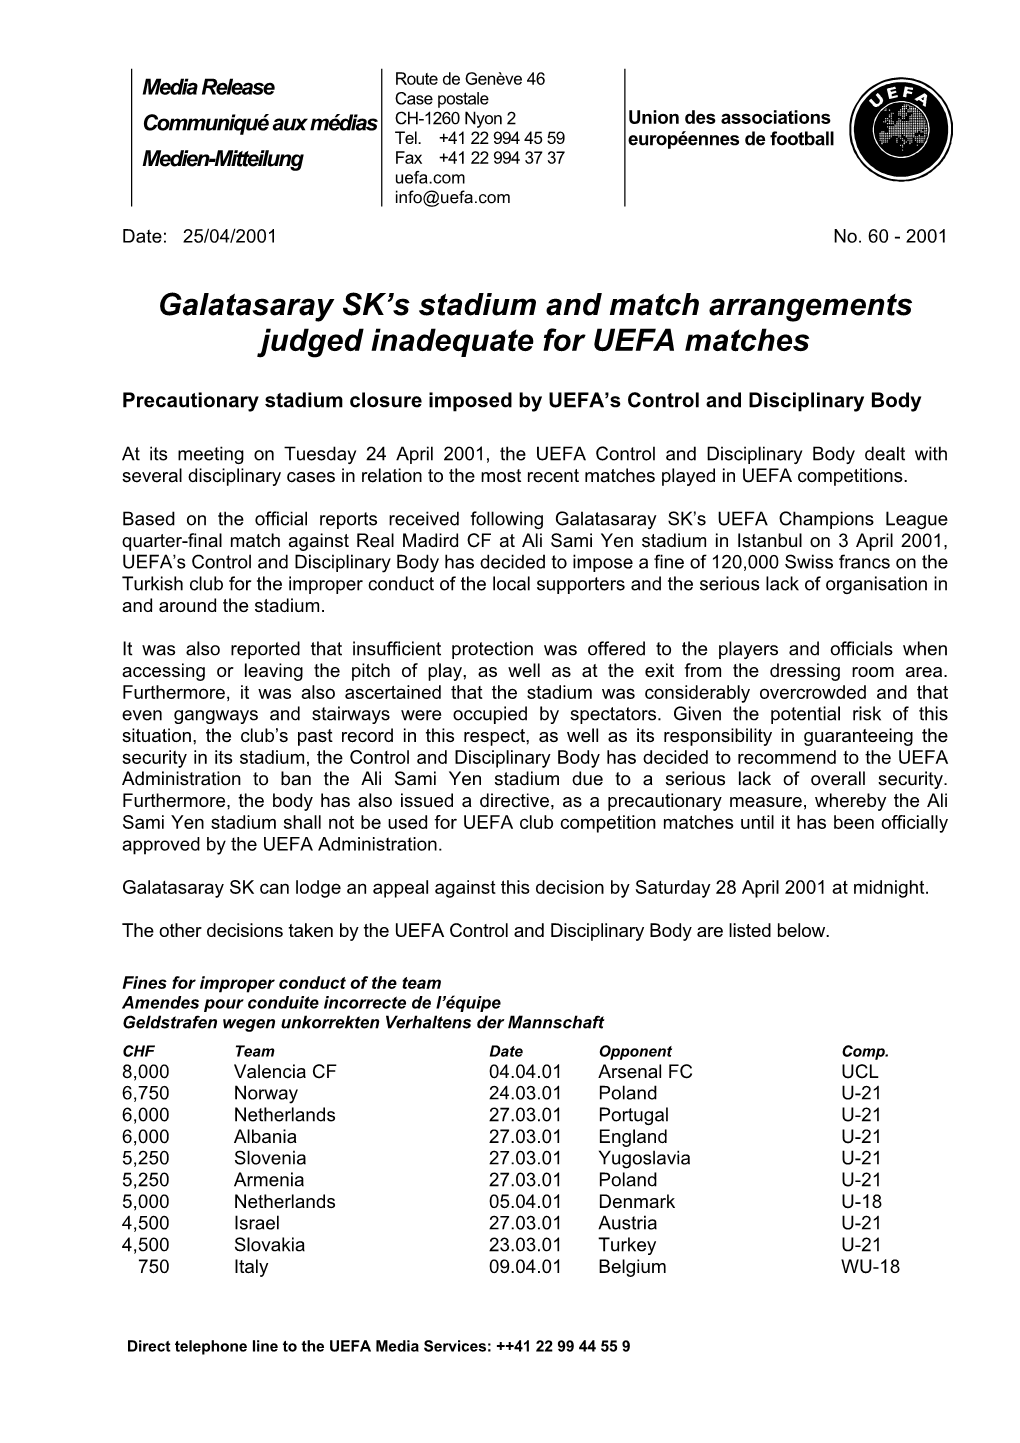 Galatasaray SK's Stadium and Match Arrangements Judged Inadequate